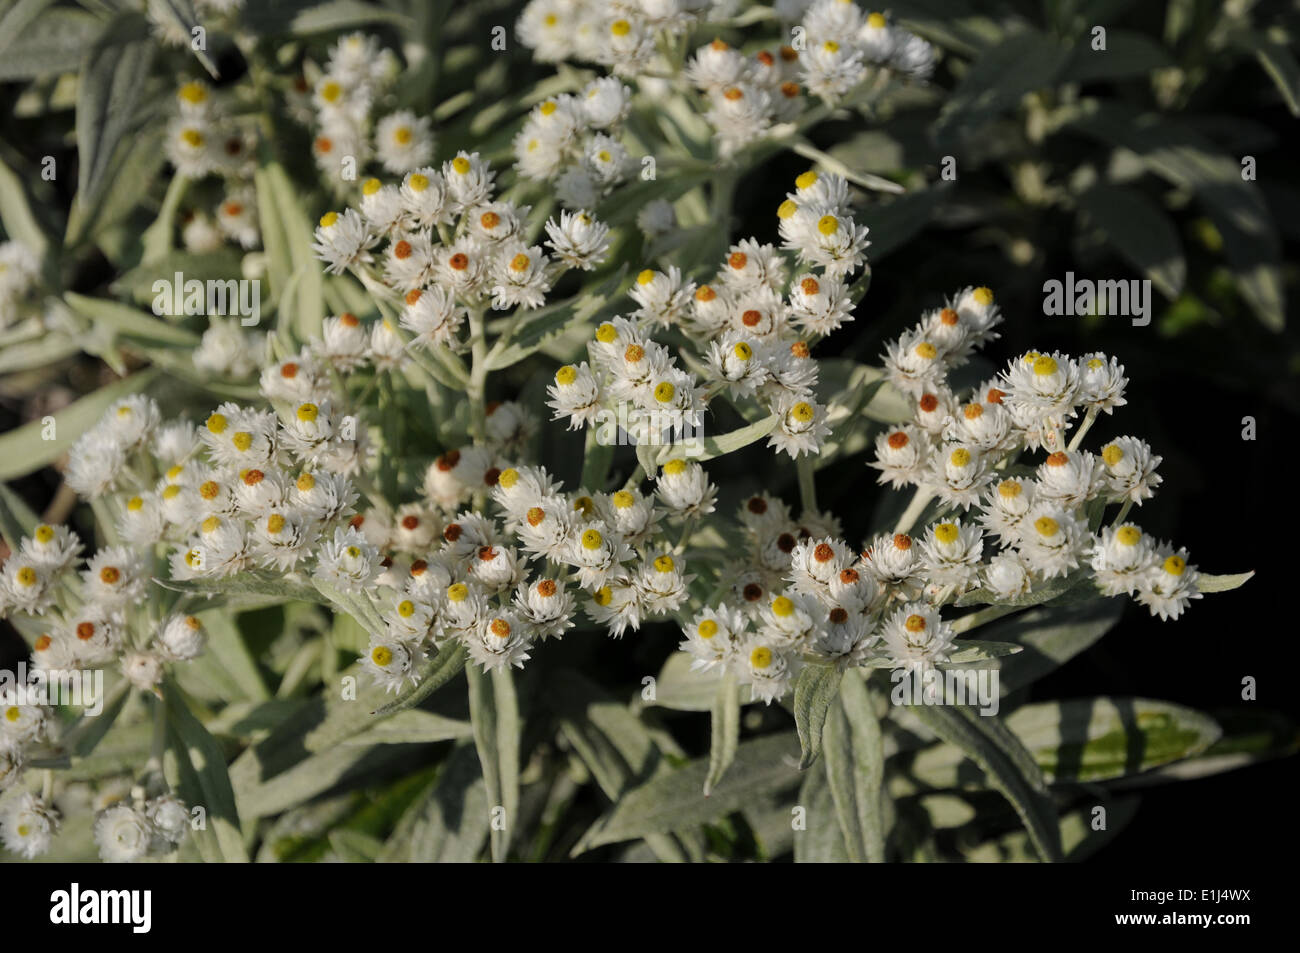 Pearly Everlasting Stock Photo